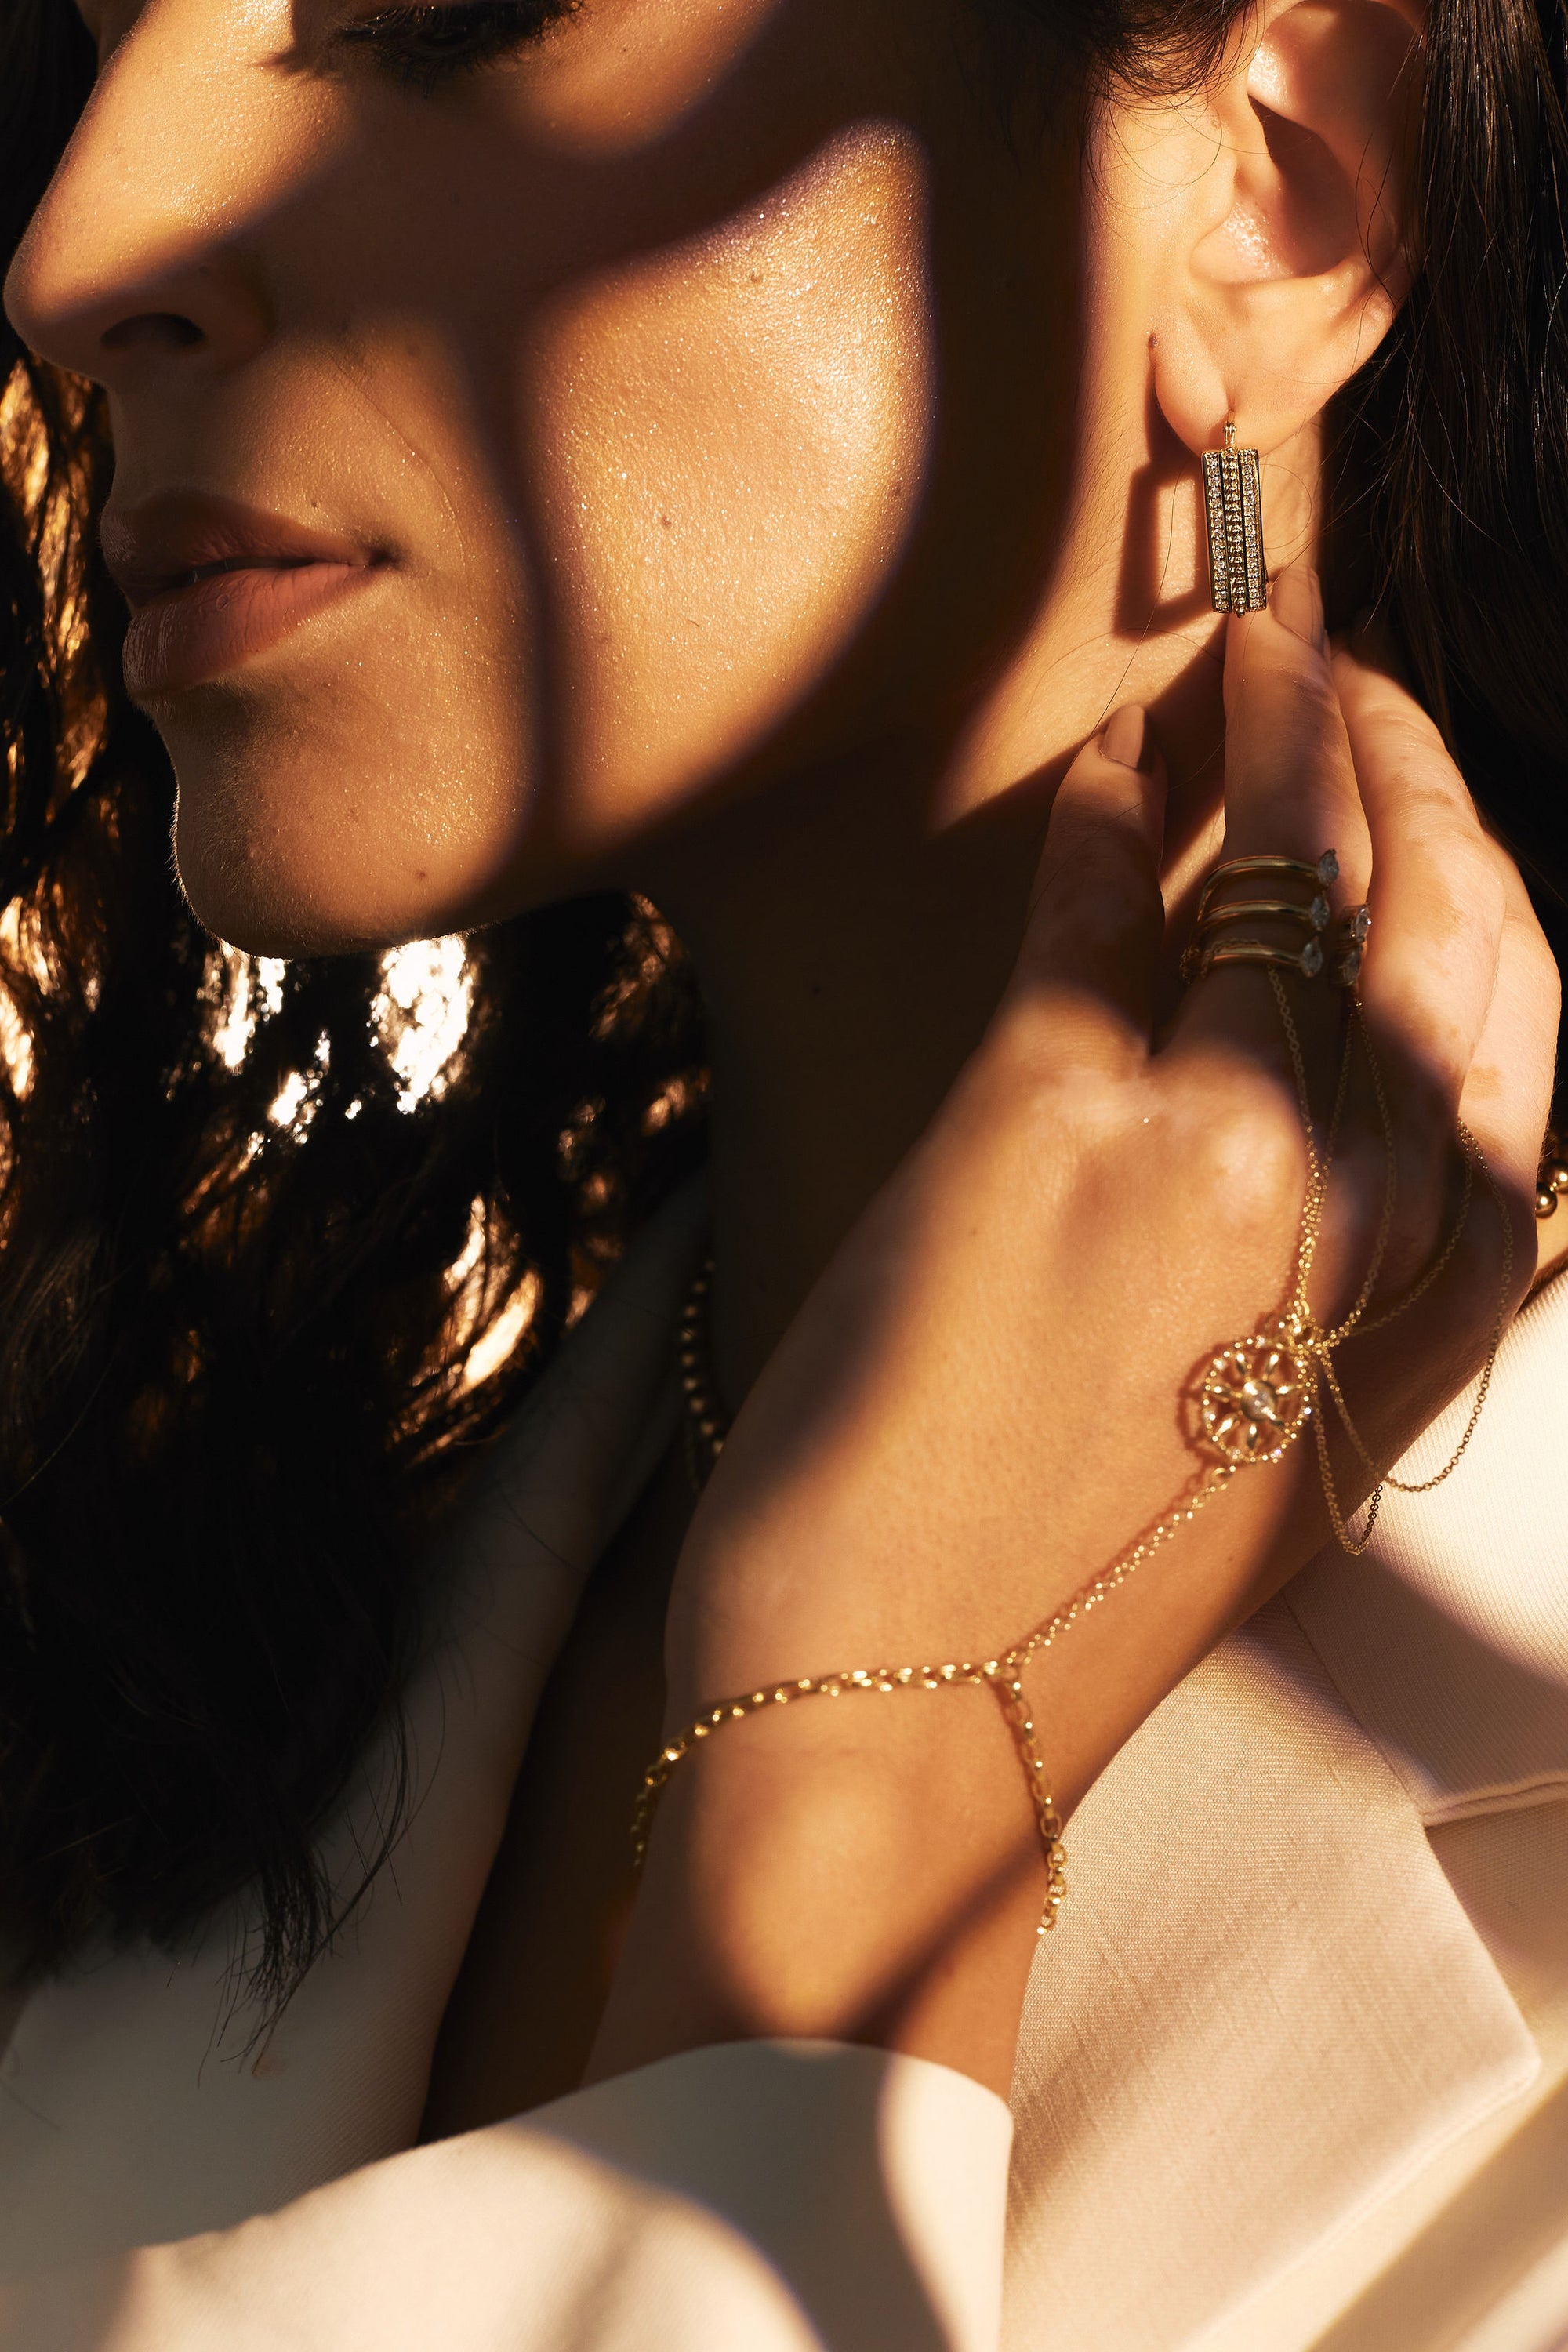 Close-up of a woman showcasing her jewelry. She wears an ear stack with Nijma M Fine Jewelry&#39;s Diamond Plaza - Square Hoop Diamond Earrings, a delicate necklace with a circular pendant, several rings, and a bracelet-ring chain. The lighting casts dramatic shadows on her face and hand, highlighting the shimmer of her natural diamond accessories.